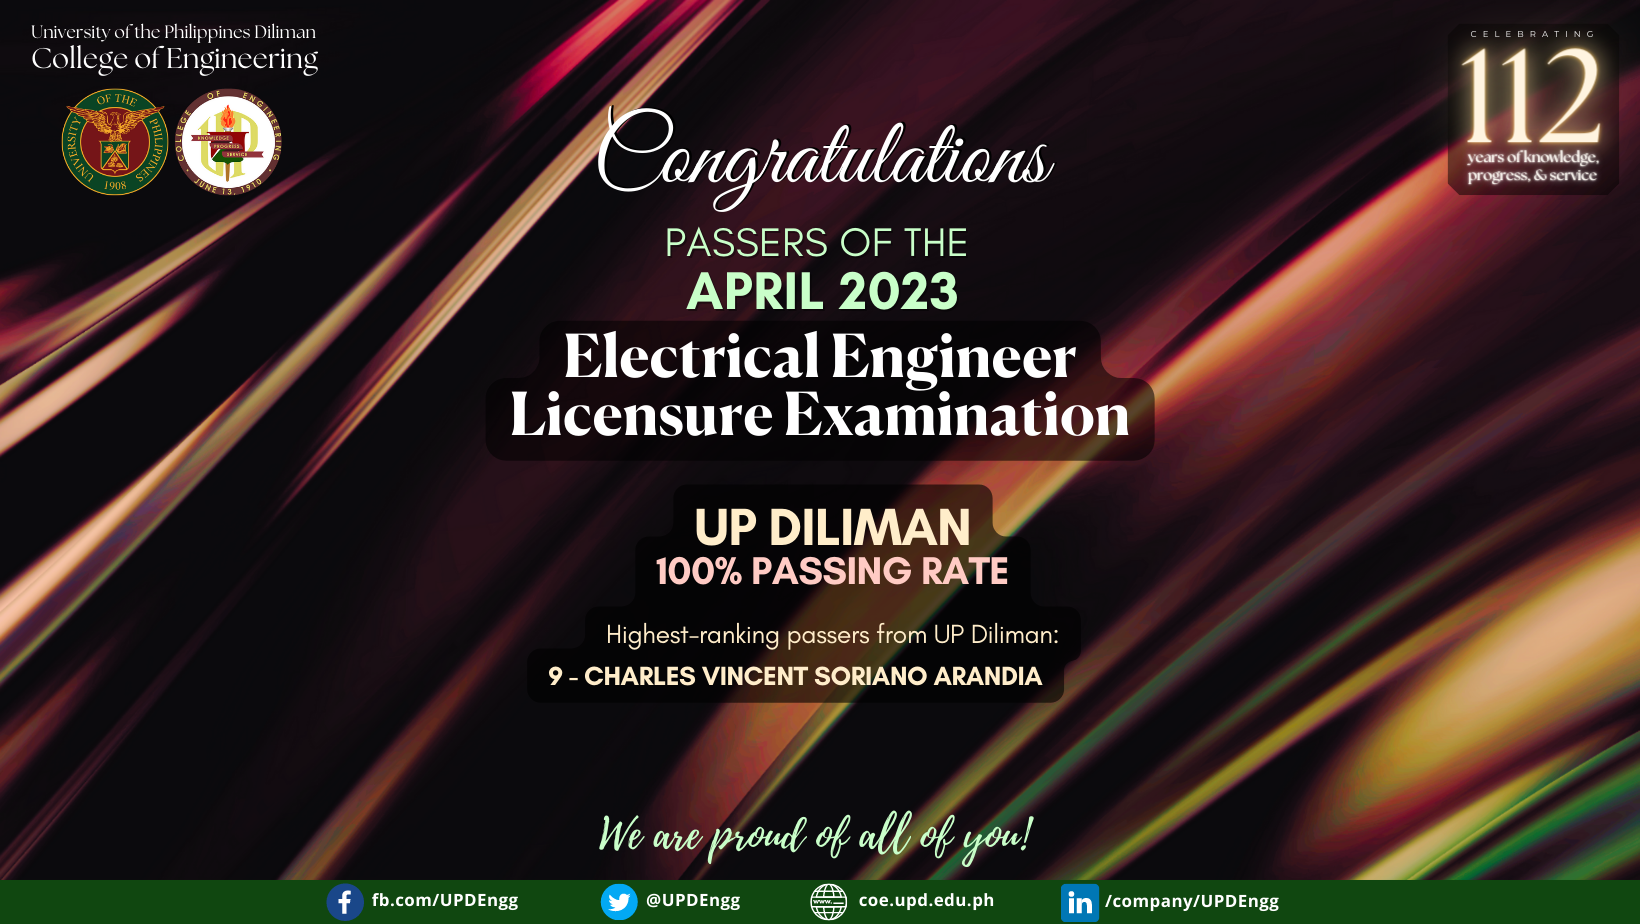 UP Diliman Tops the 2023 Electrical Engineer Licensure Exams